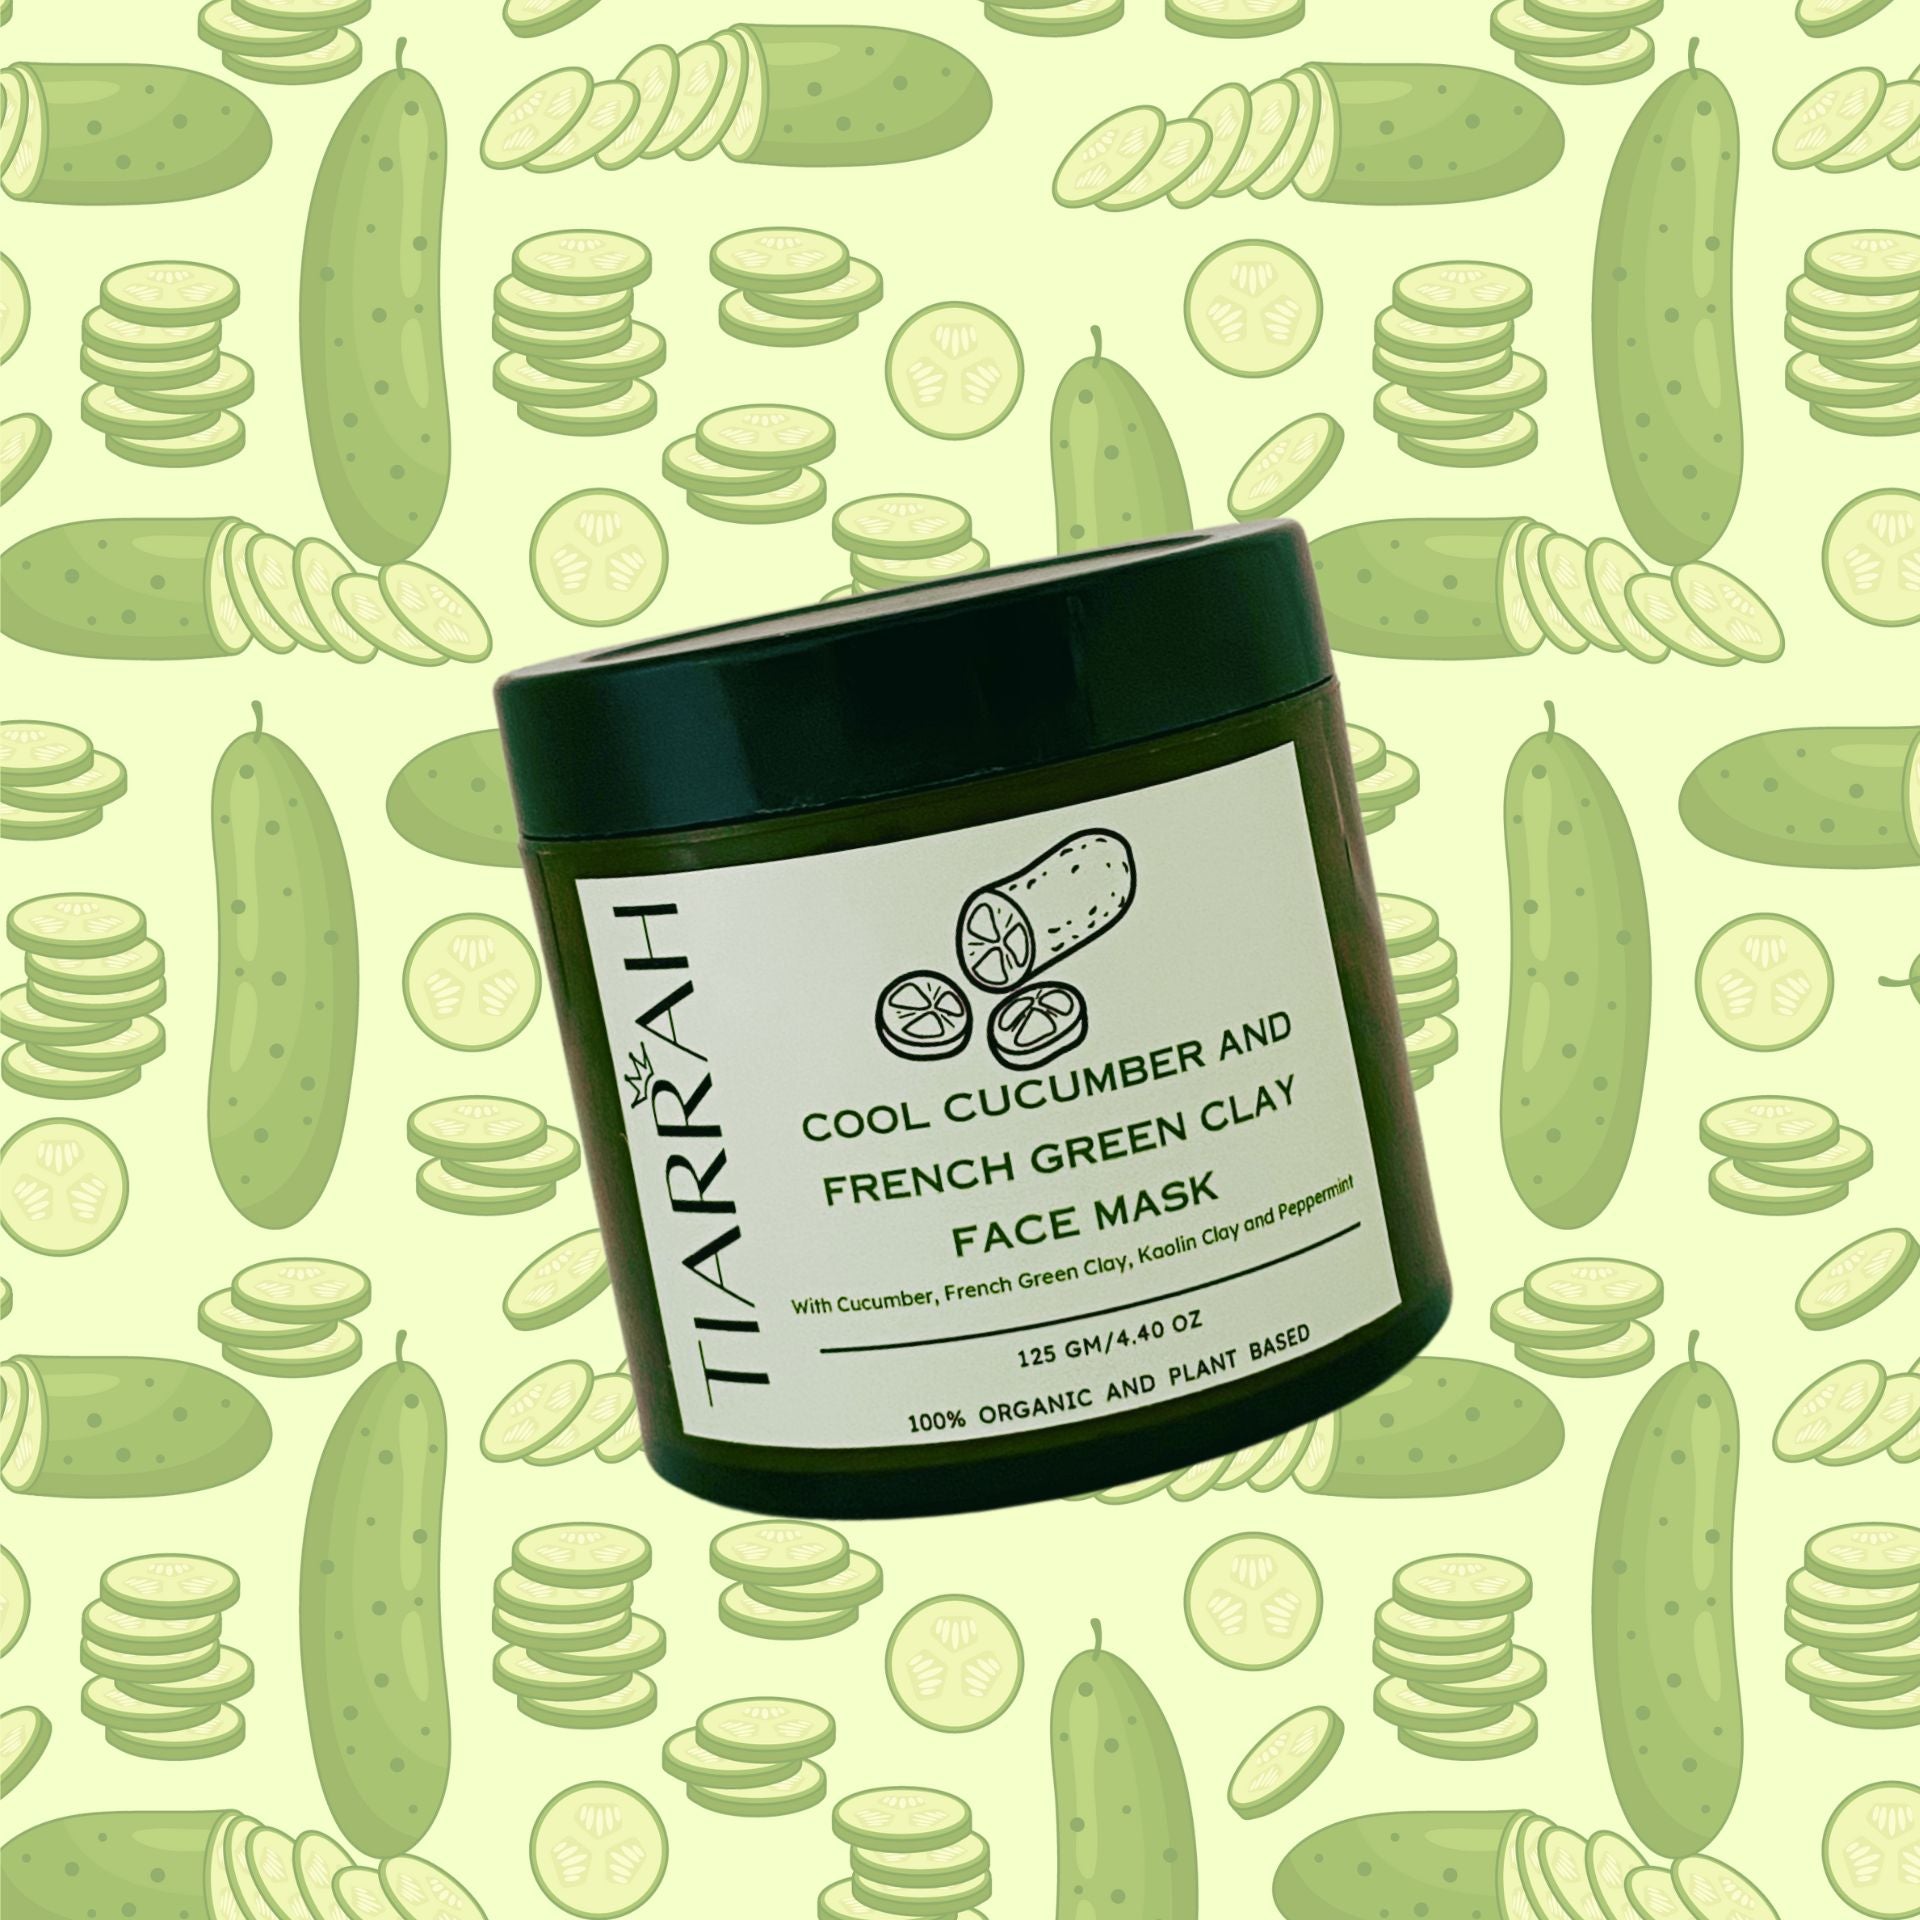 Luxury Cucumber & French Green Clay Face Mask by Tiarrah: Organic, Non-Toxic - The Luxury Bath and Body Care Shop